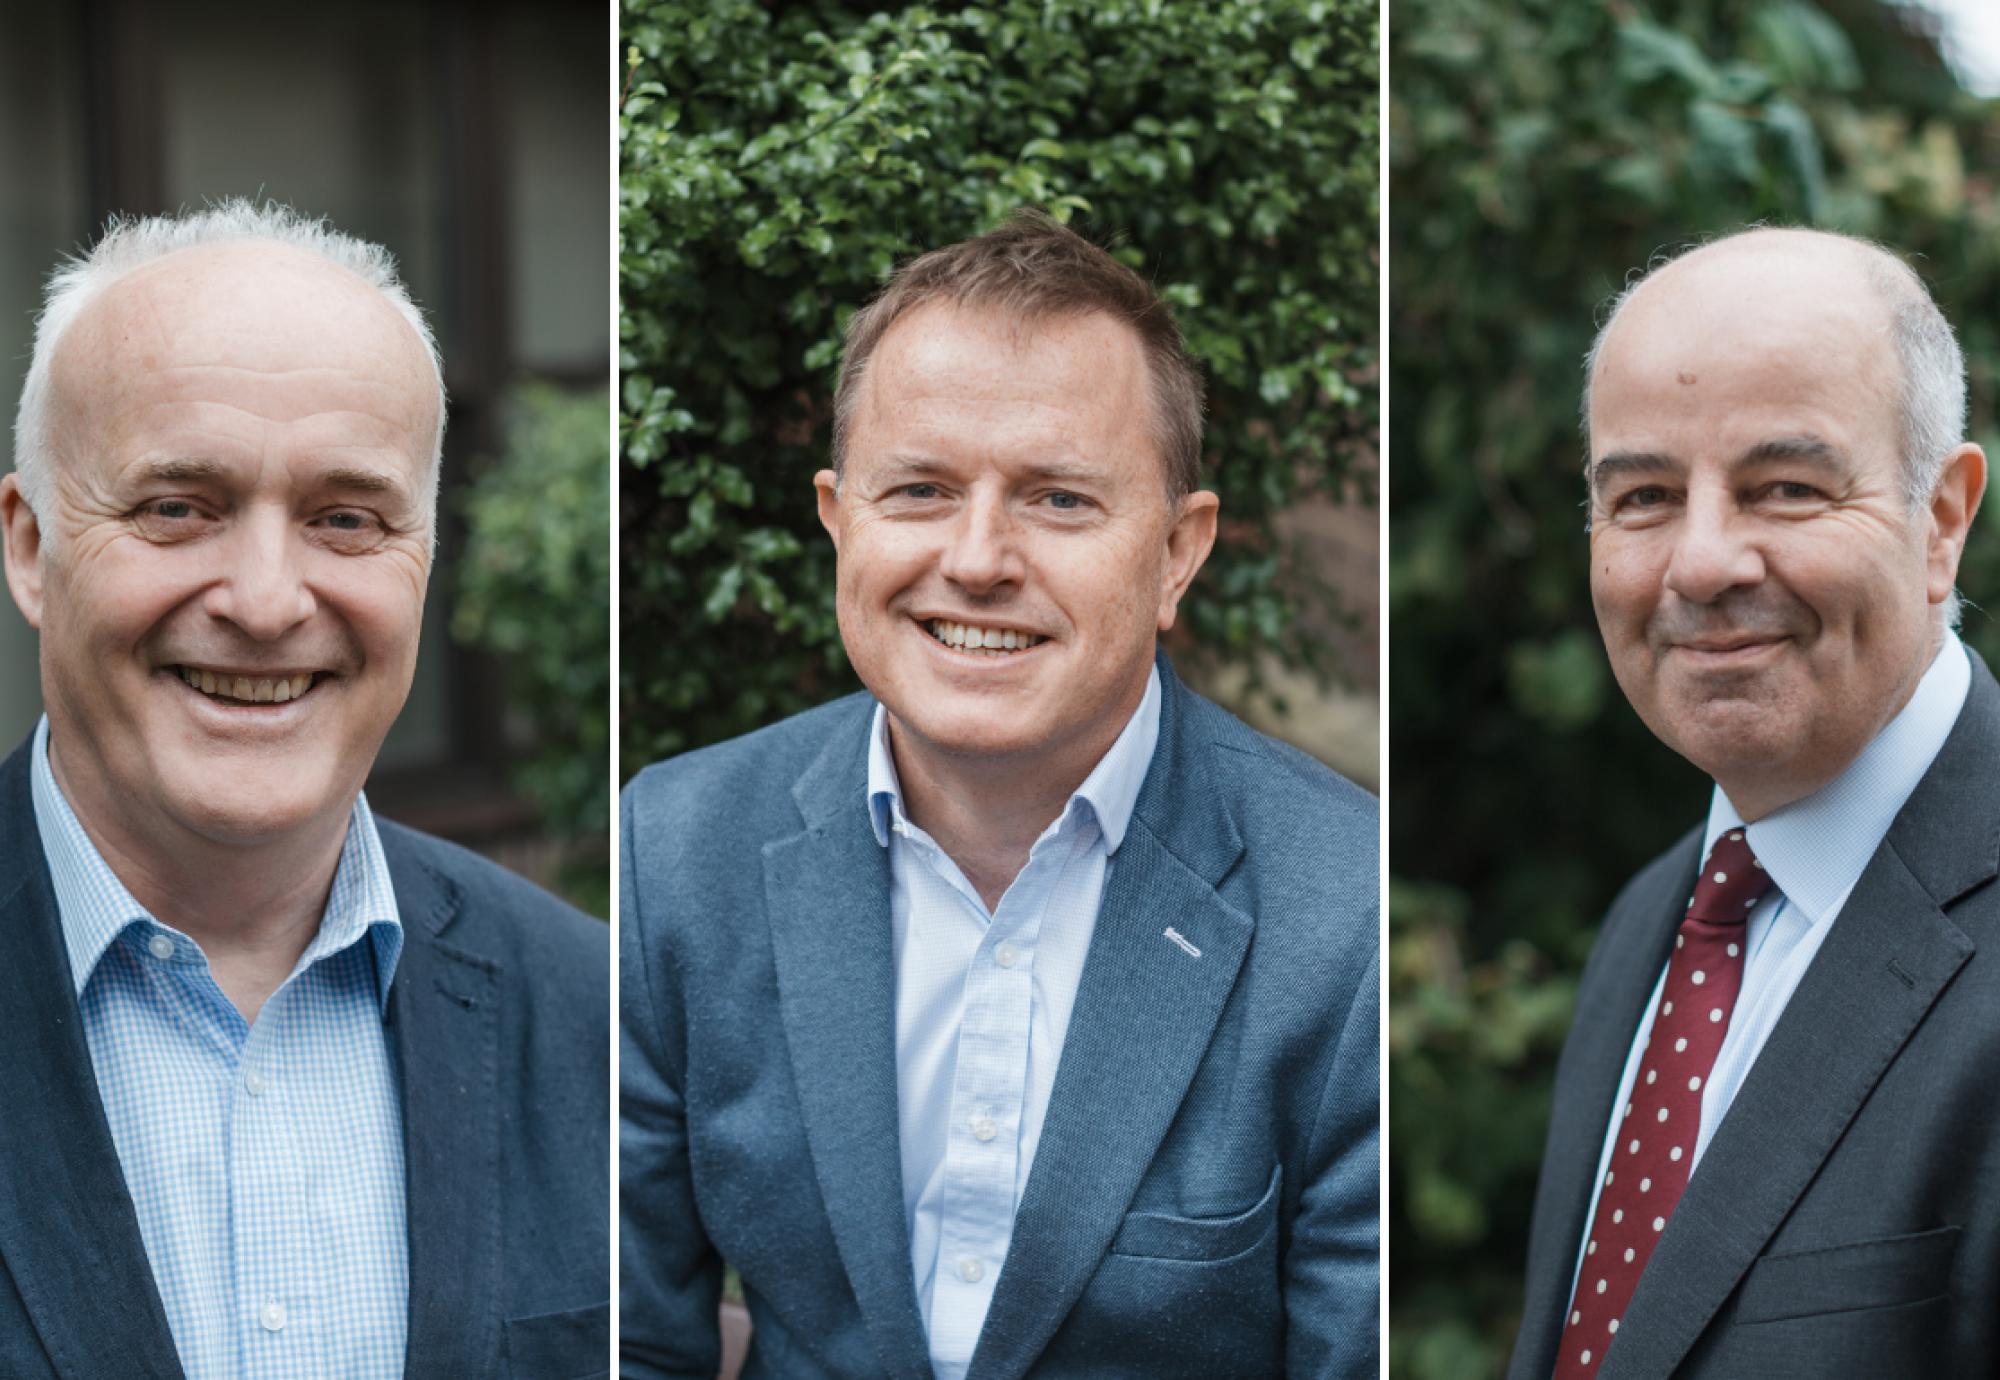 Chiltern welcomes three new directors